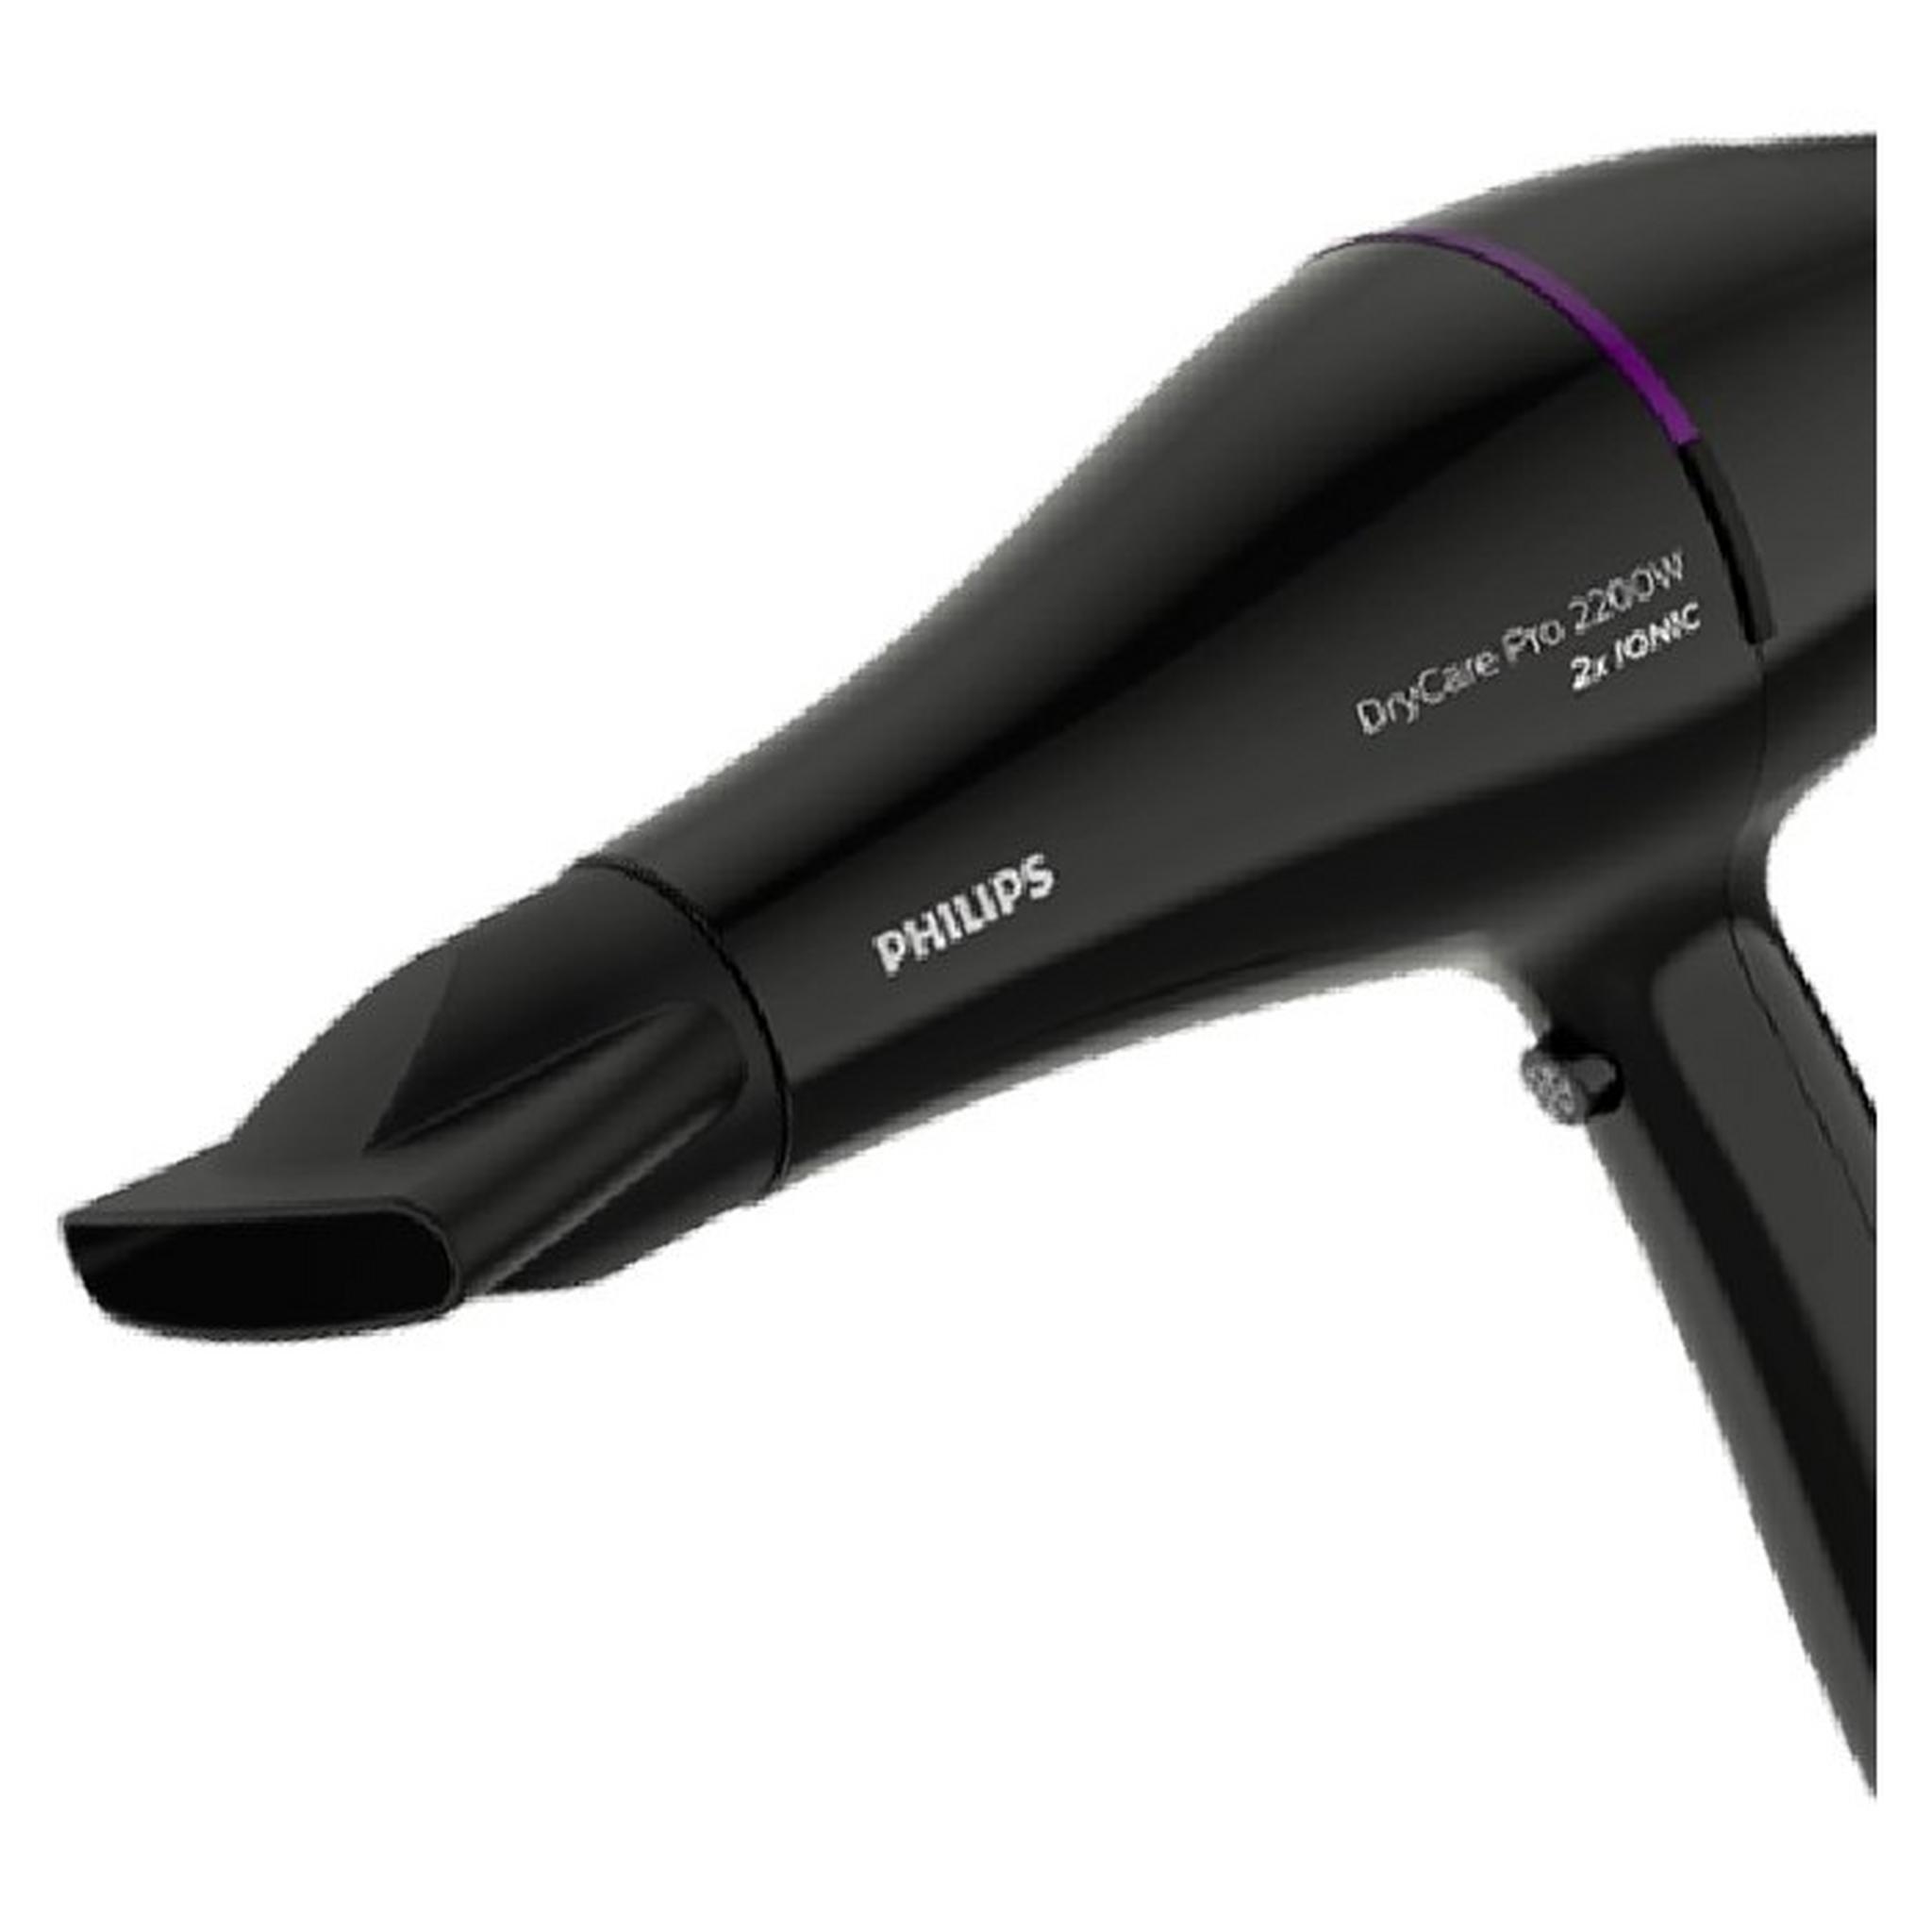 Philips DryCare Pro Hairdryer - Black